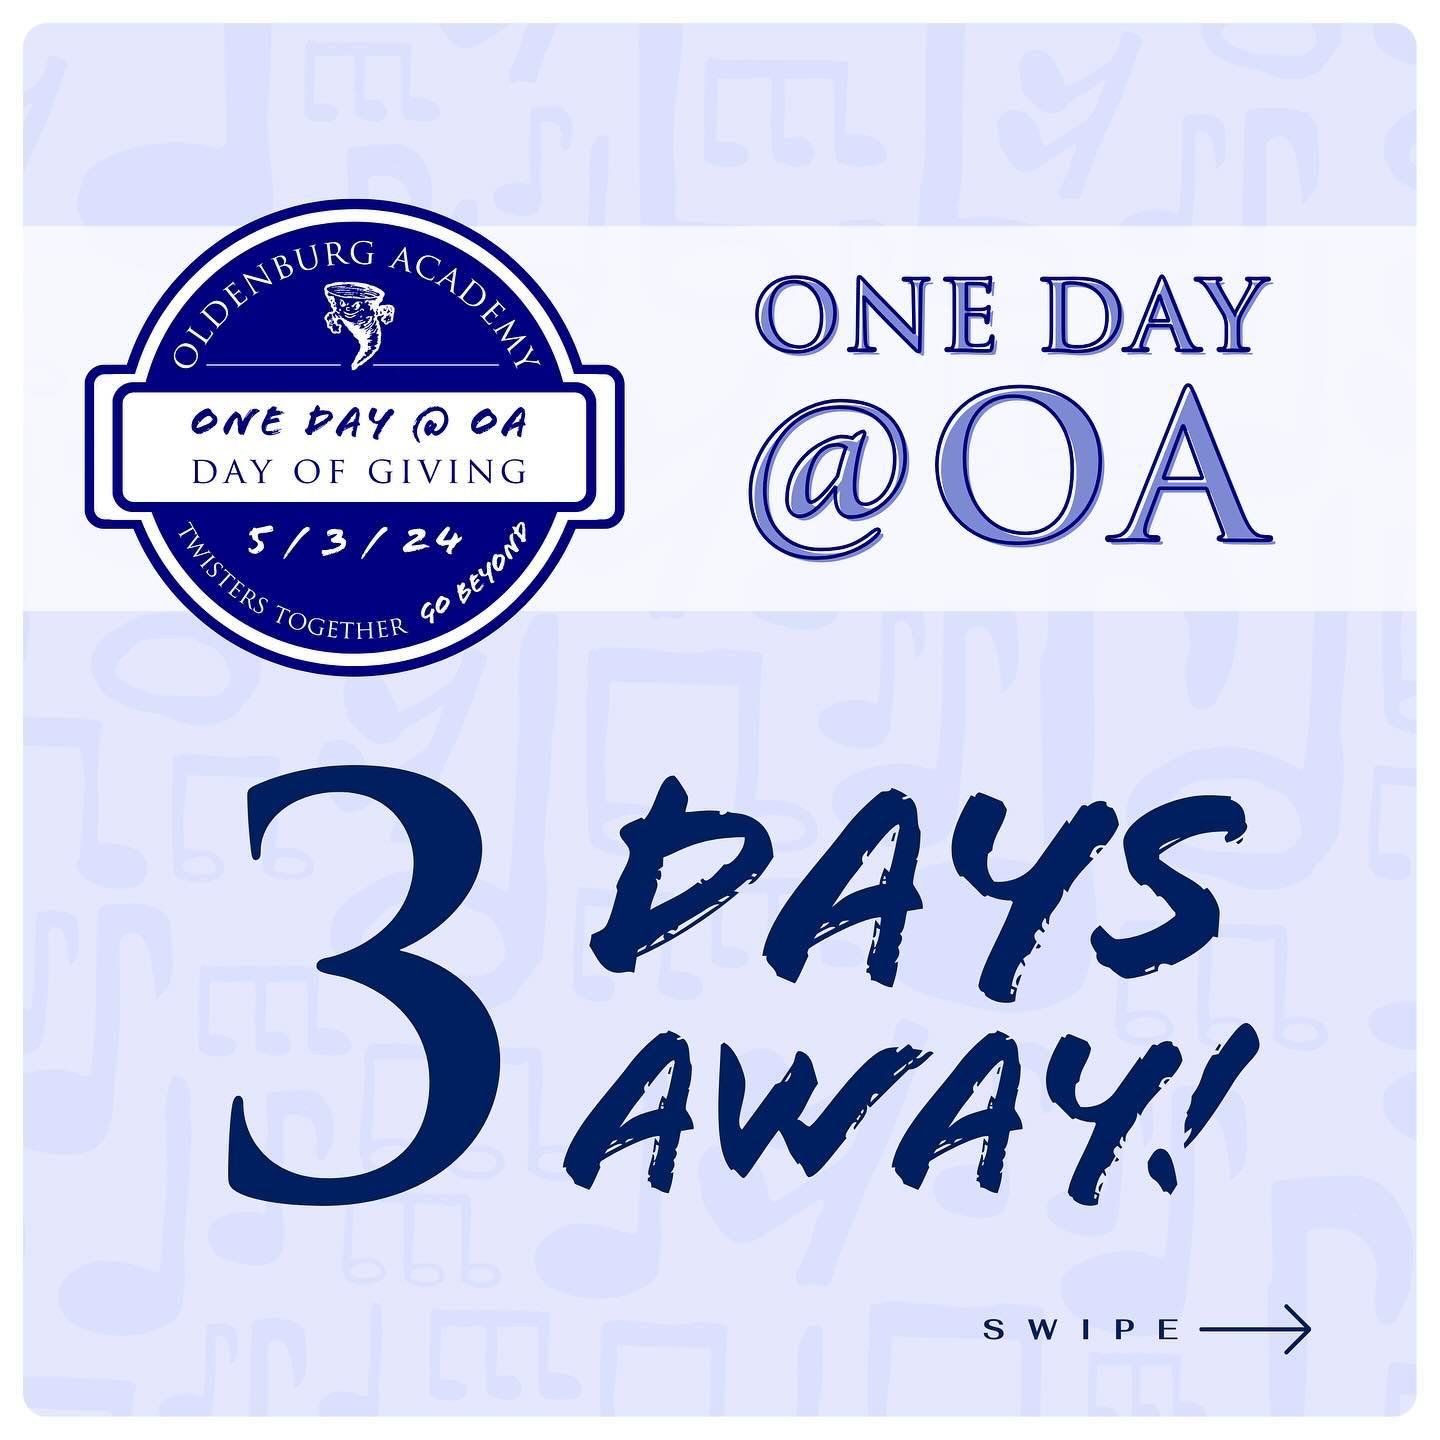 We are only 3 days away from One Day @ OA!

You won&rsquo;t want to miss out on the festivities planned for May 3rd! Our goal is to get as many Twisters as possible to participate and come together! 

There are many ways to participate! 

&bull; Come